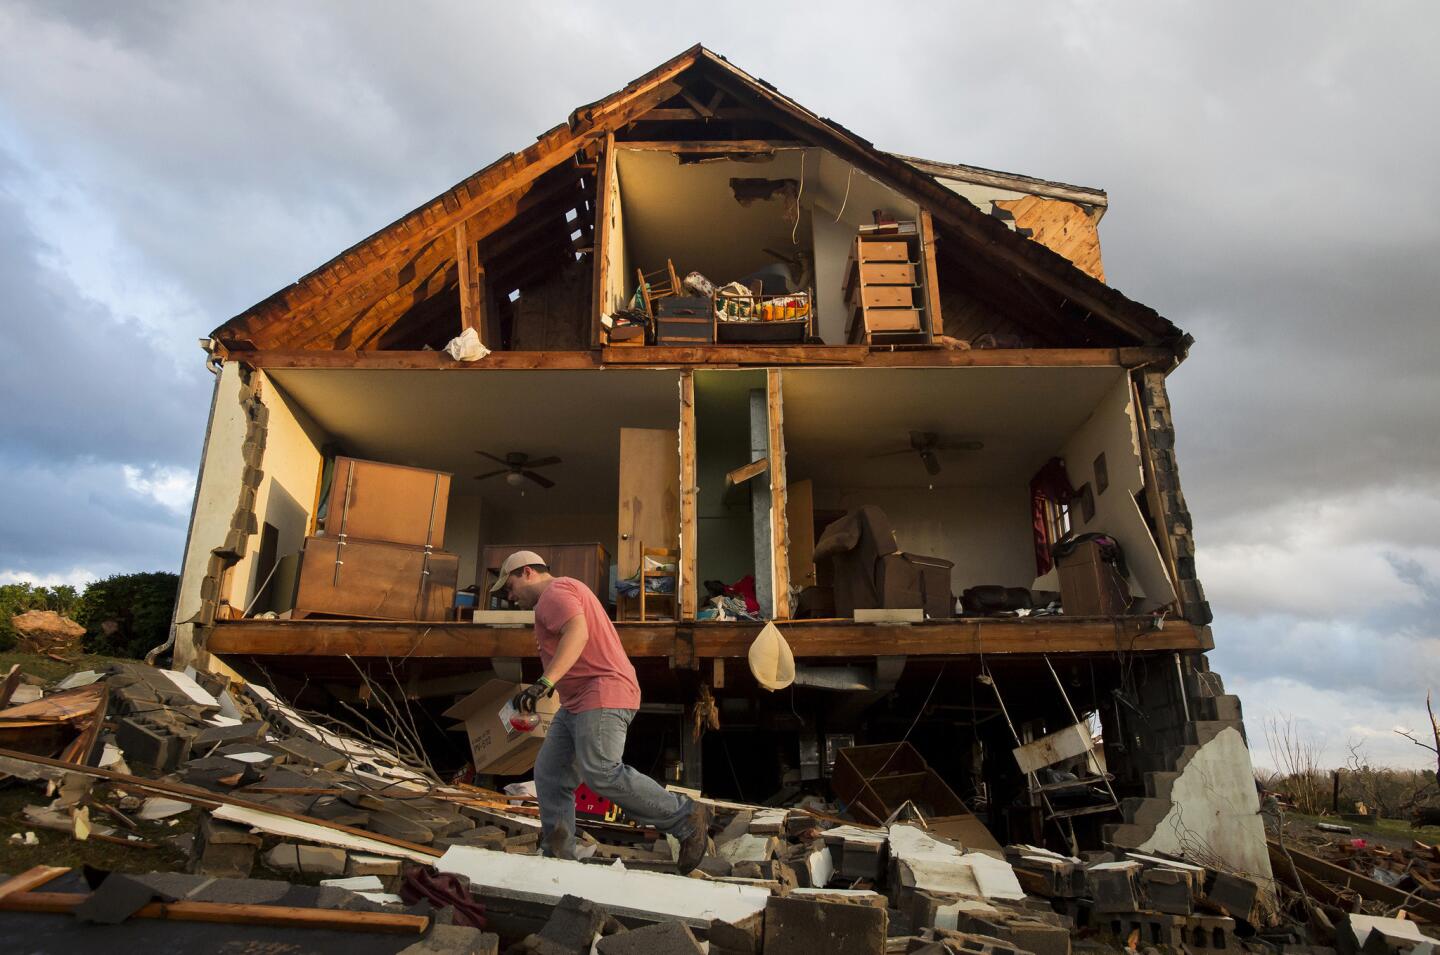 Nick Mobley helps clean up a house owned by a family friend, after a storm hit Appomattox County, Va.